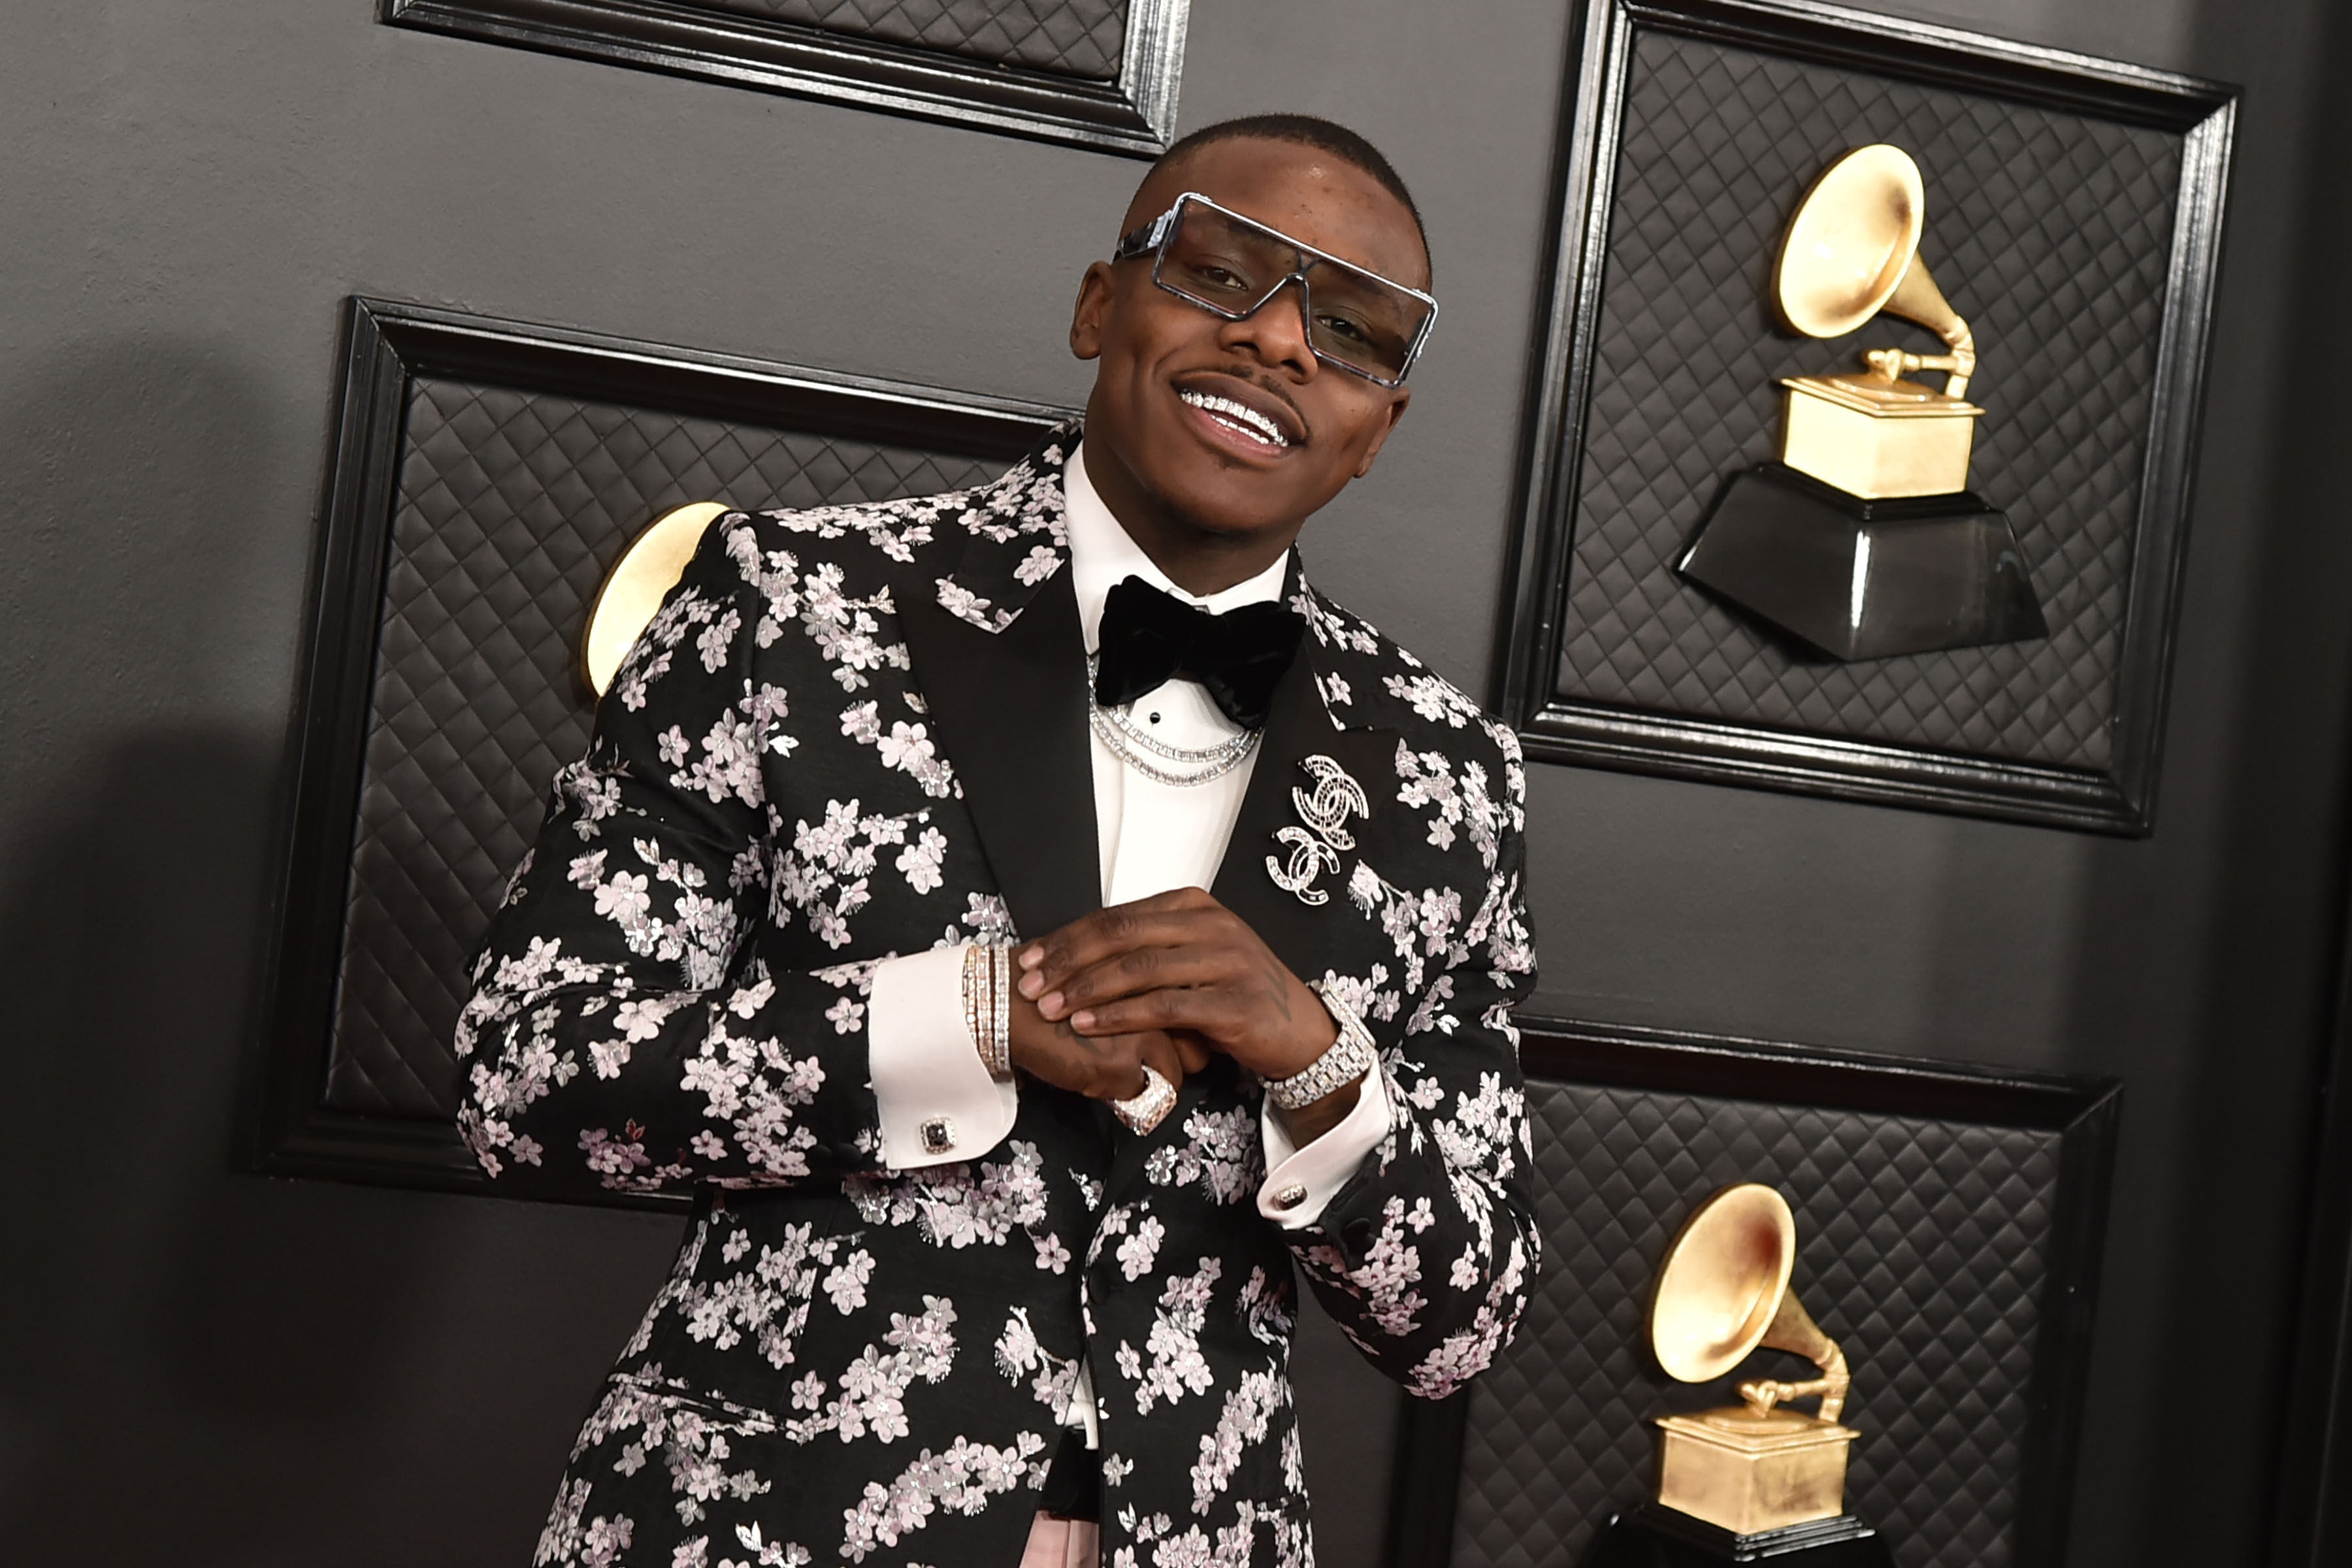 DaBaby Win $6 Million Lawsuit Over Alleged Miami Assault